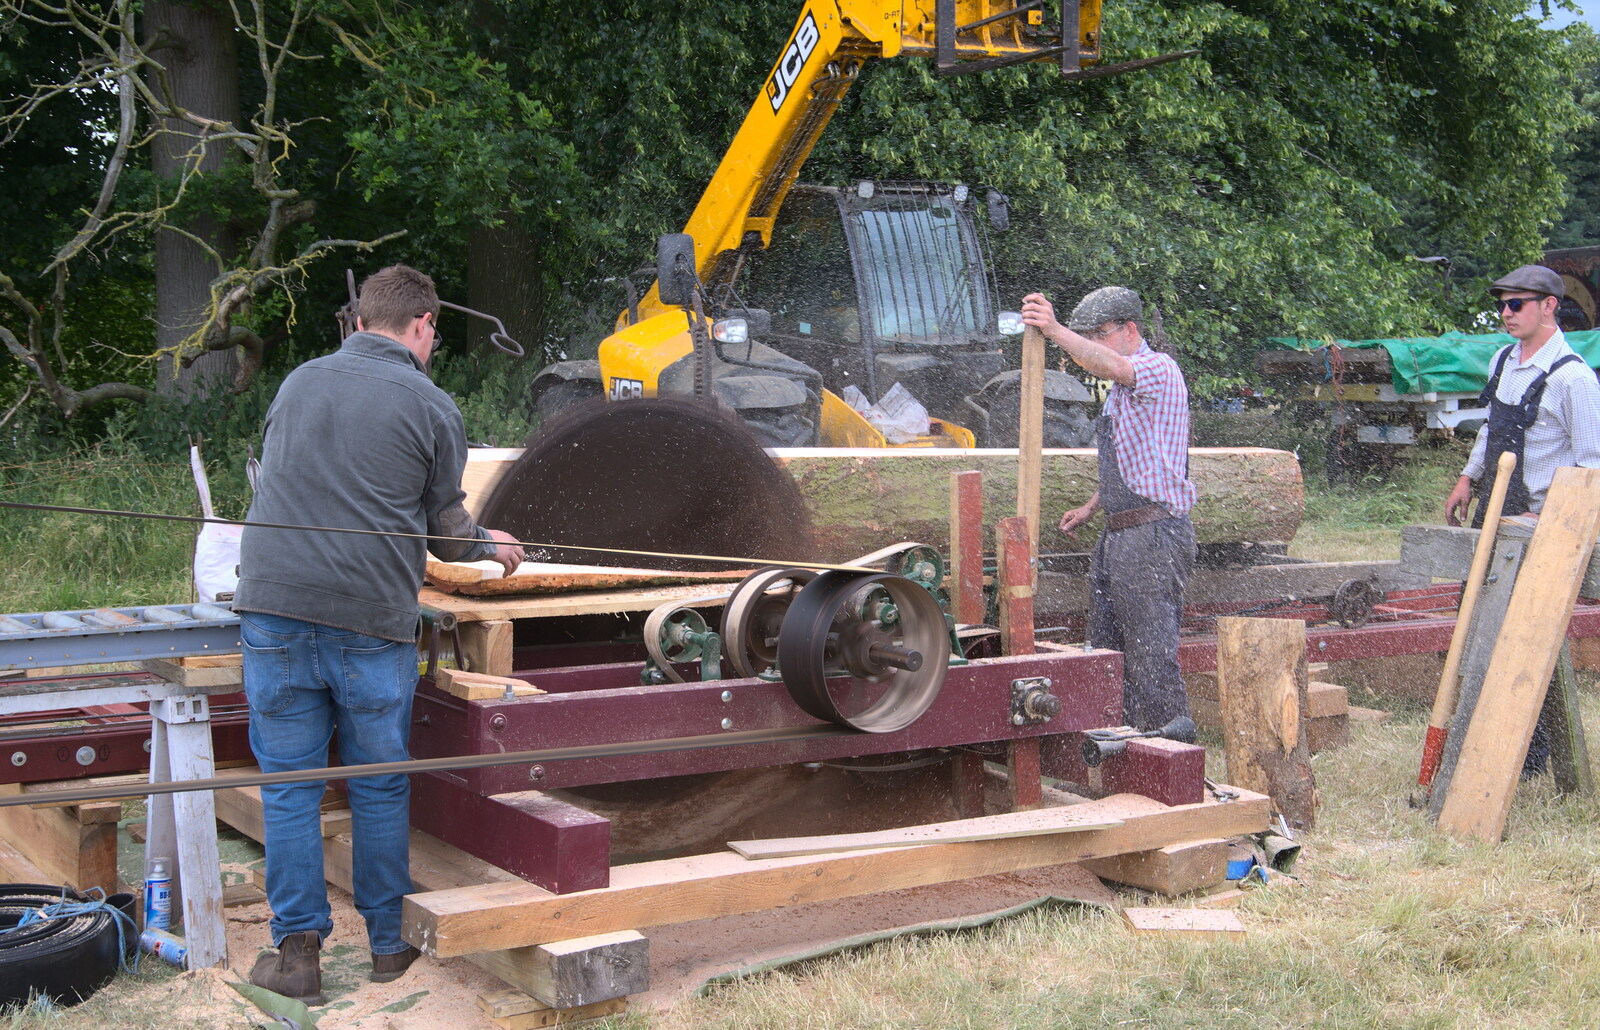 Sawdust flies at the steam-driven saw from The Formerly-Known-As-The-Eye-Show, Palgrave, Suffolk - 17th June 2018